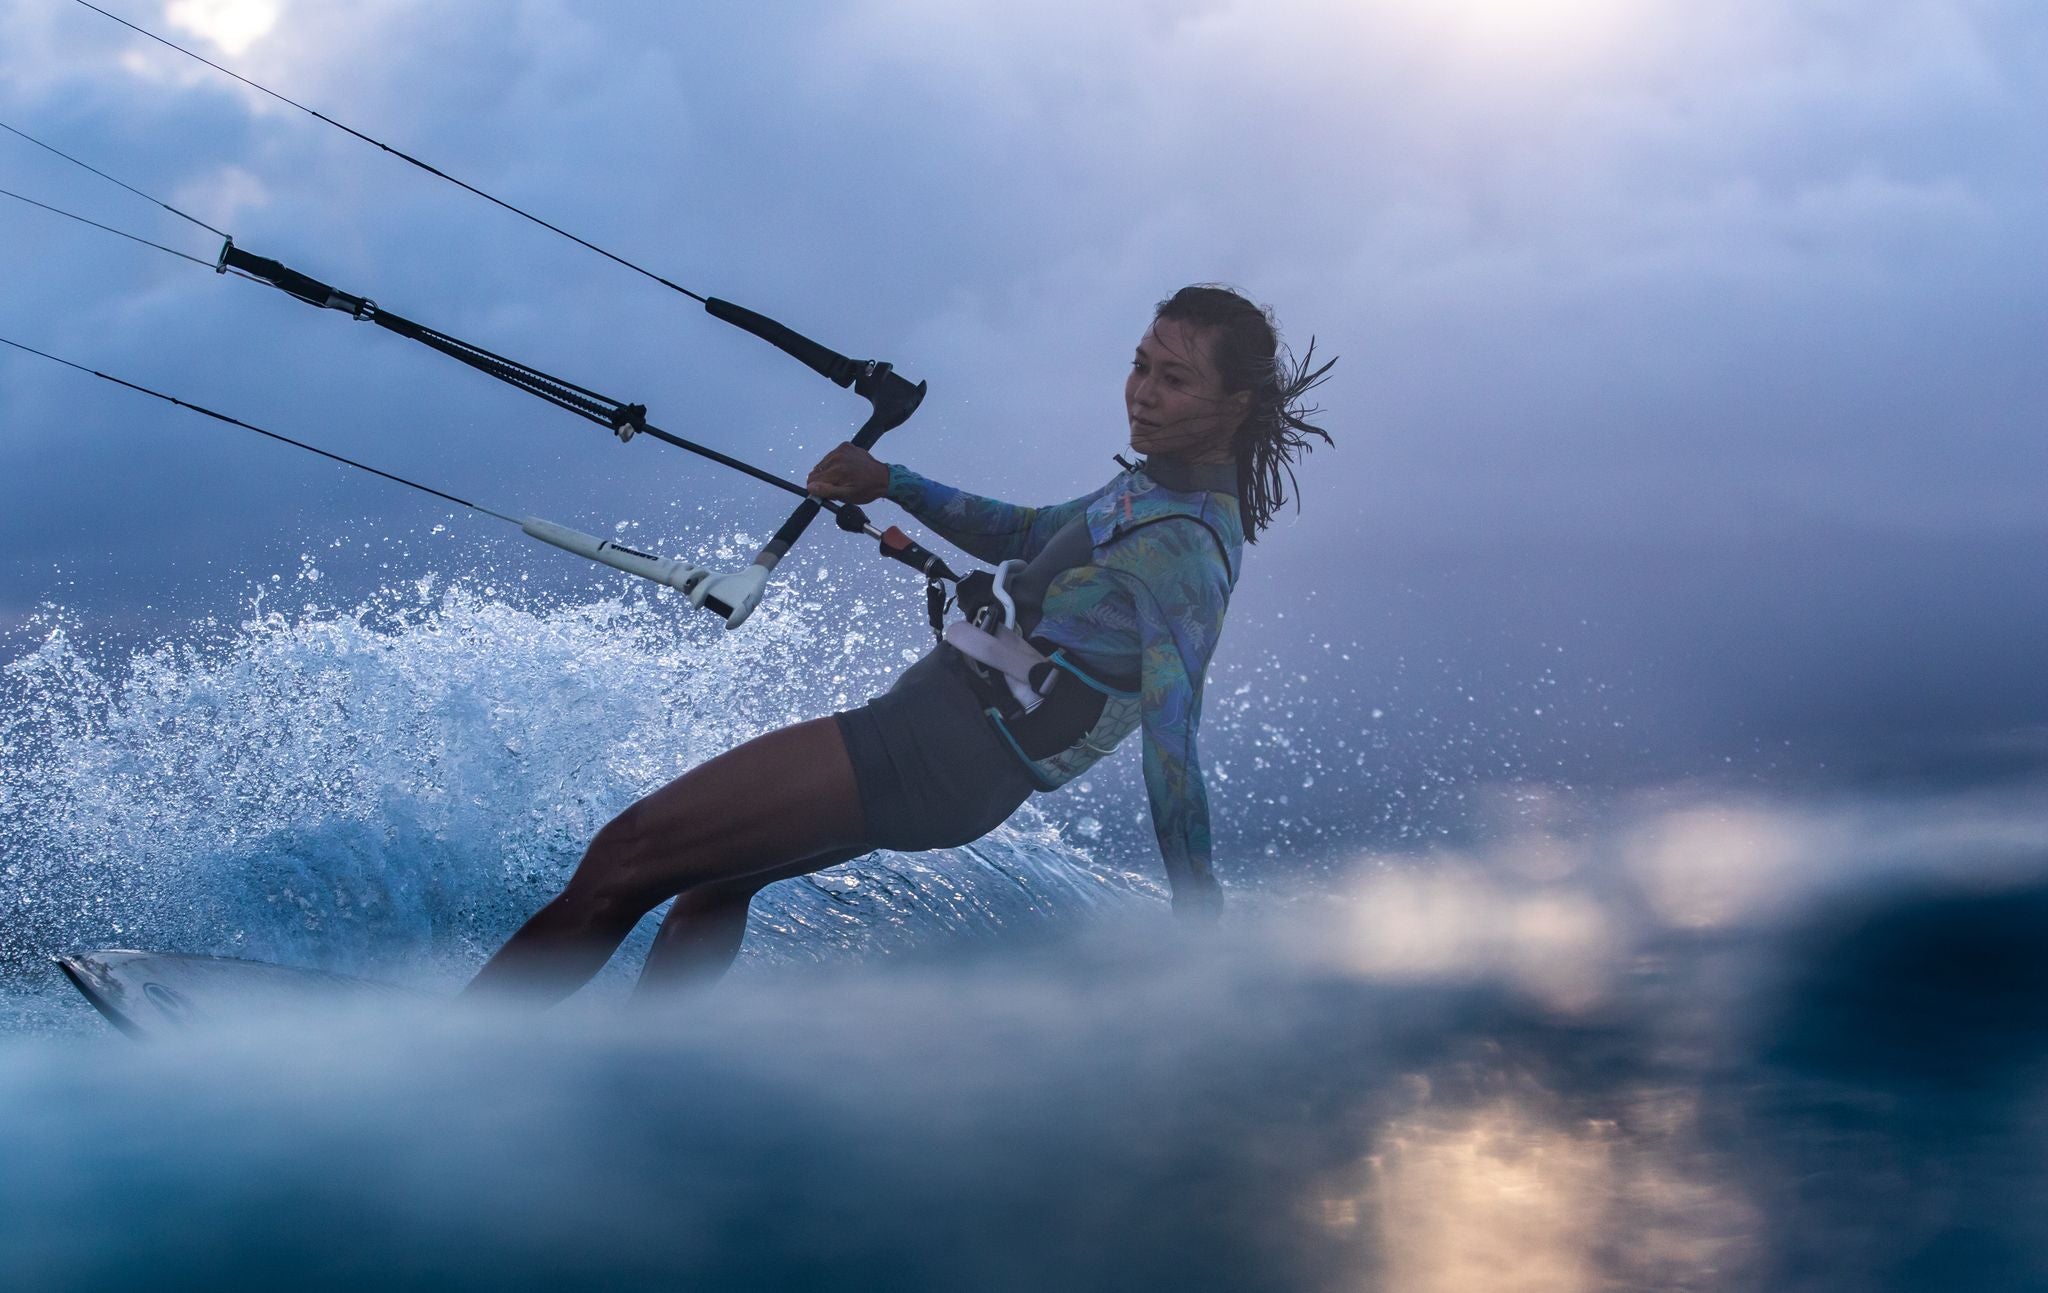 Kiting into the sunset with Moona Whyte